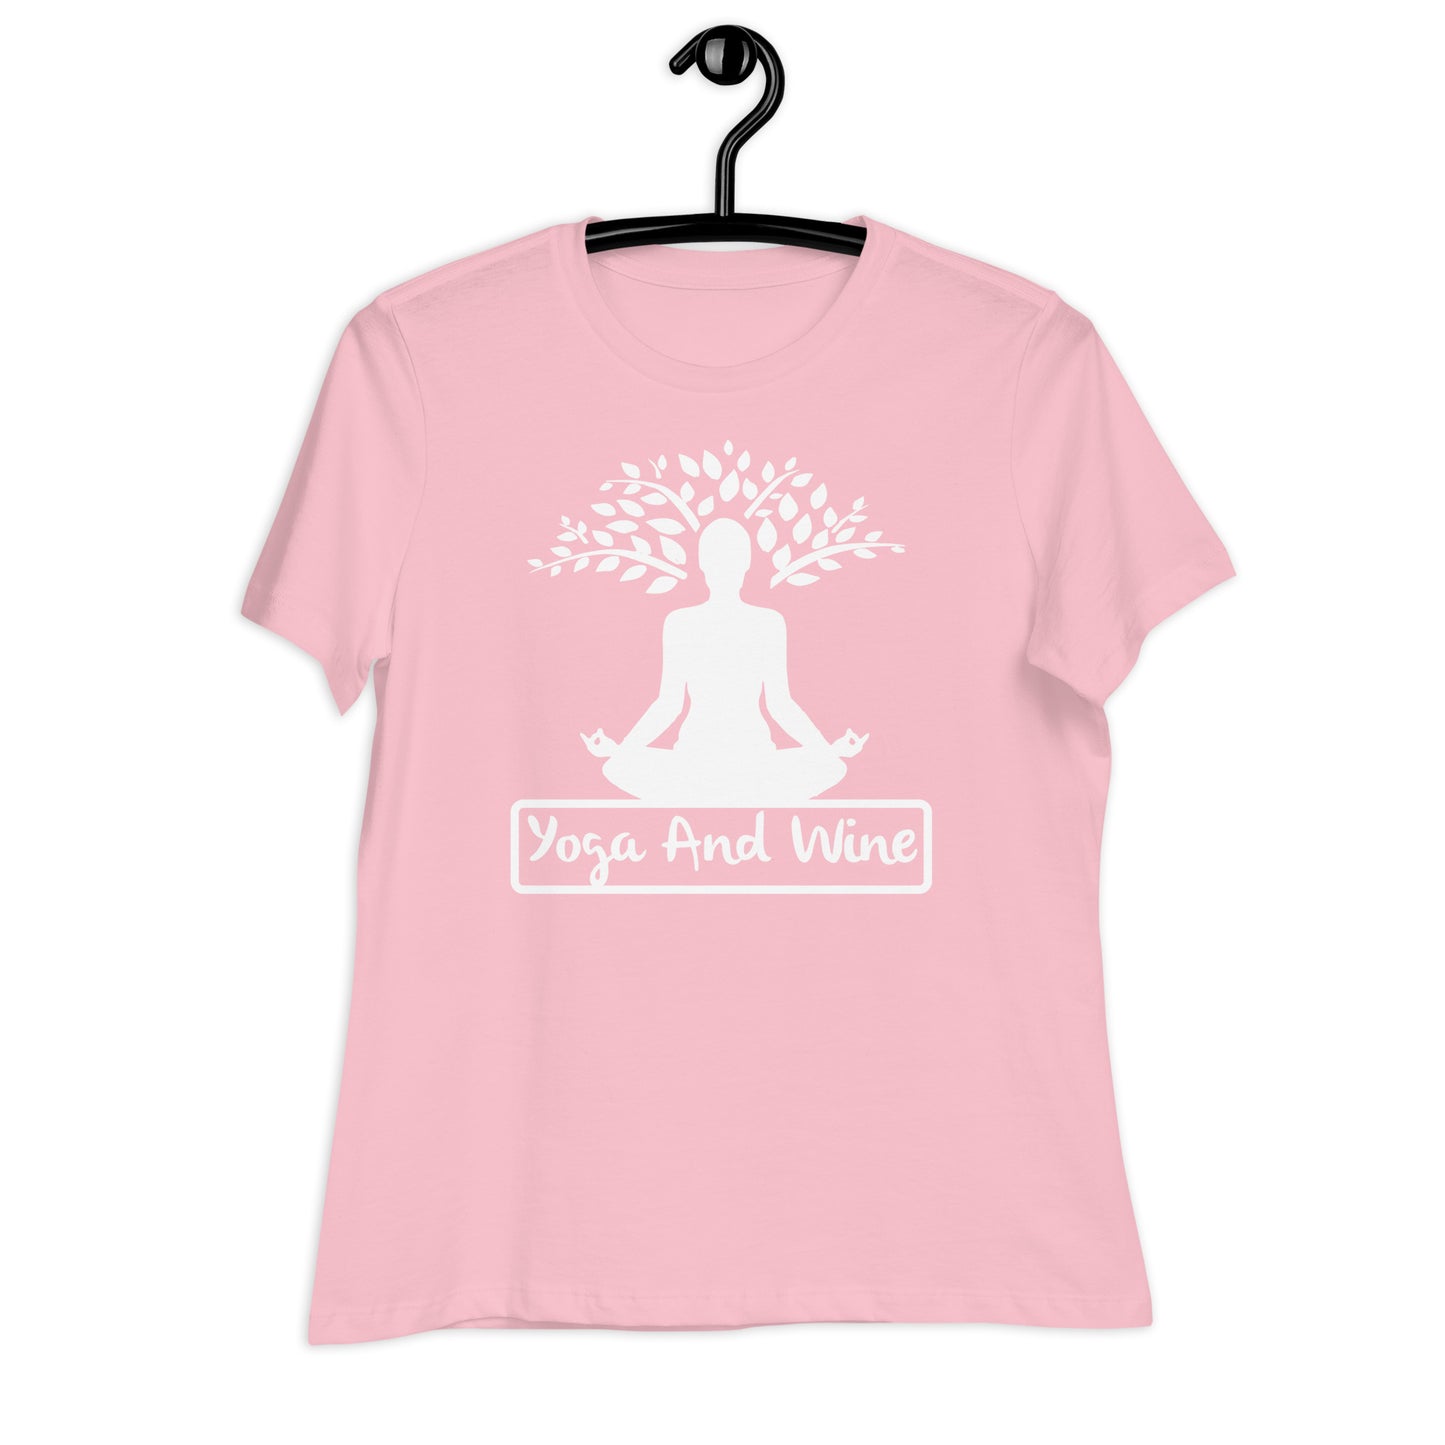 Yoga And Wine - Women's Relaxed T-Shirt